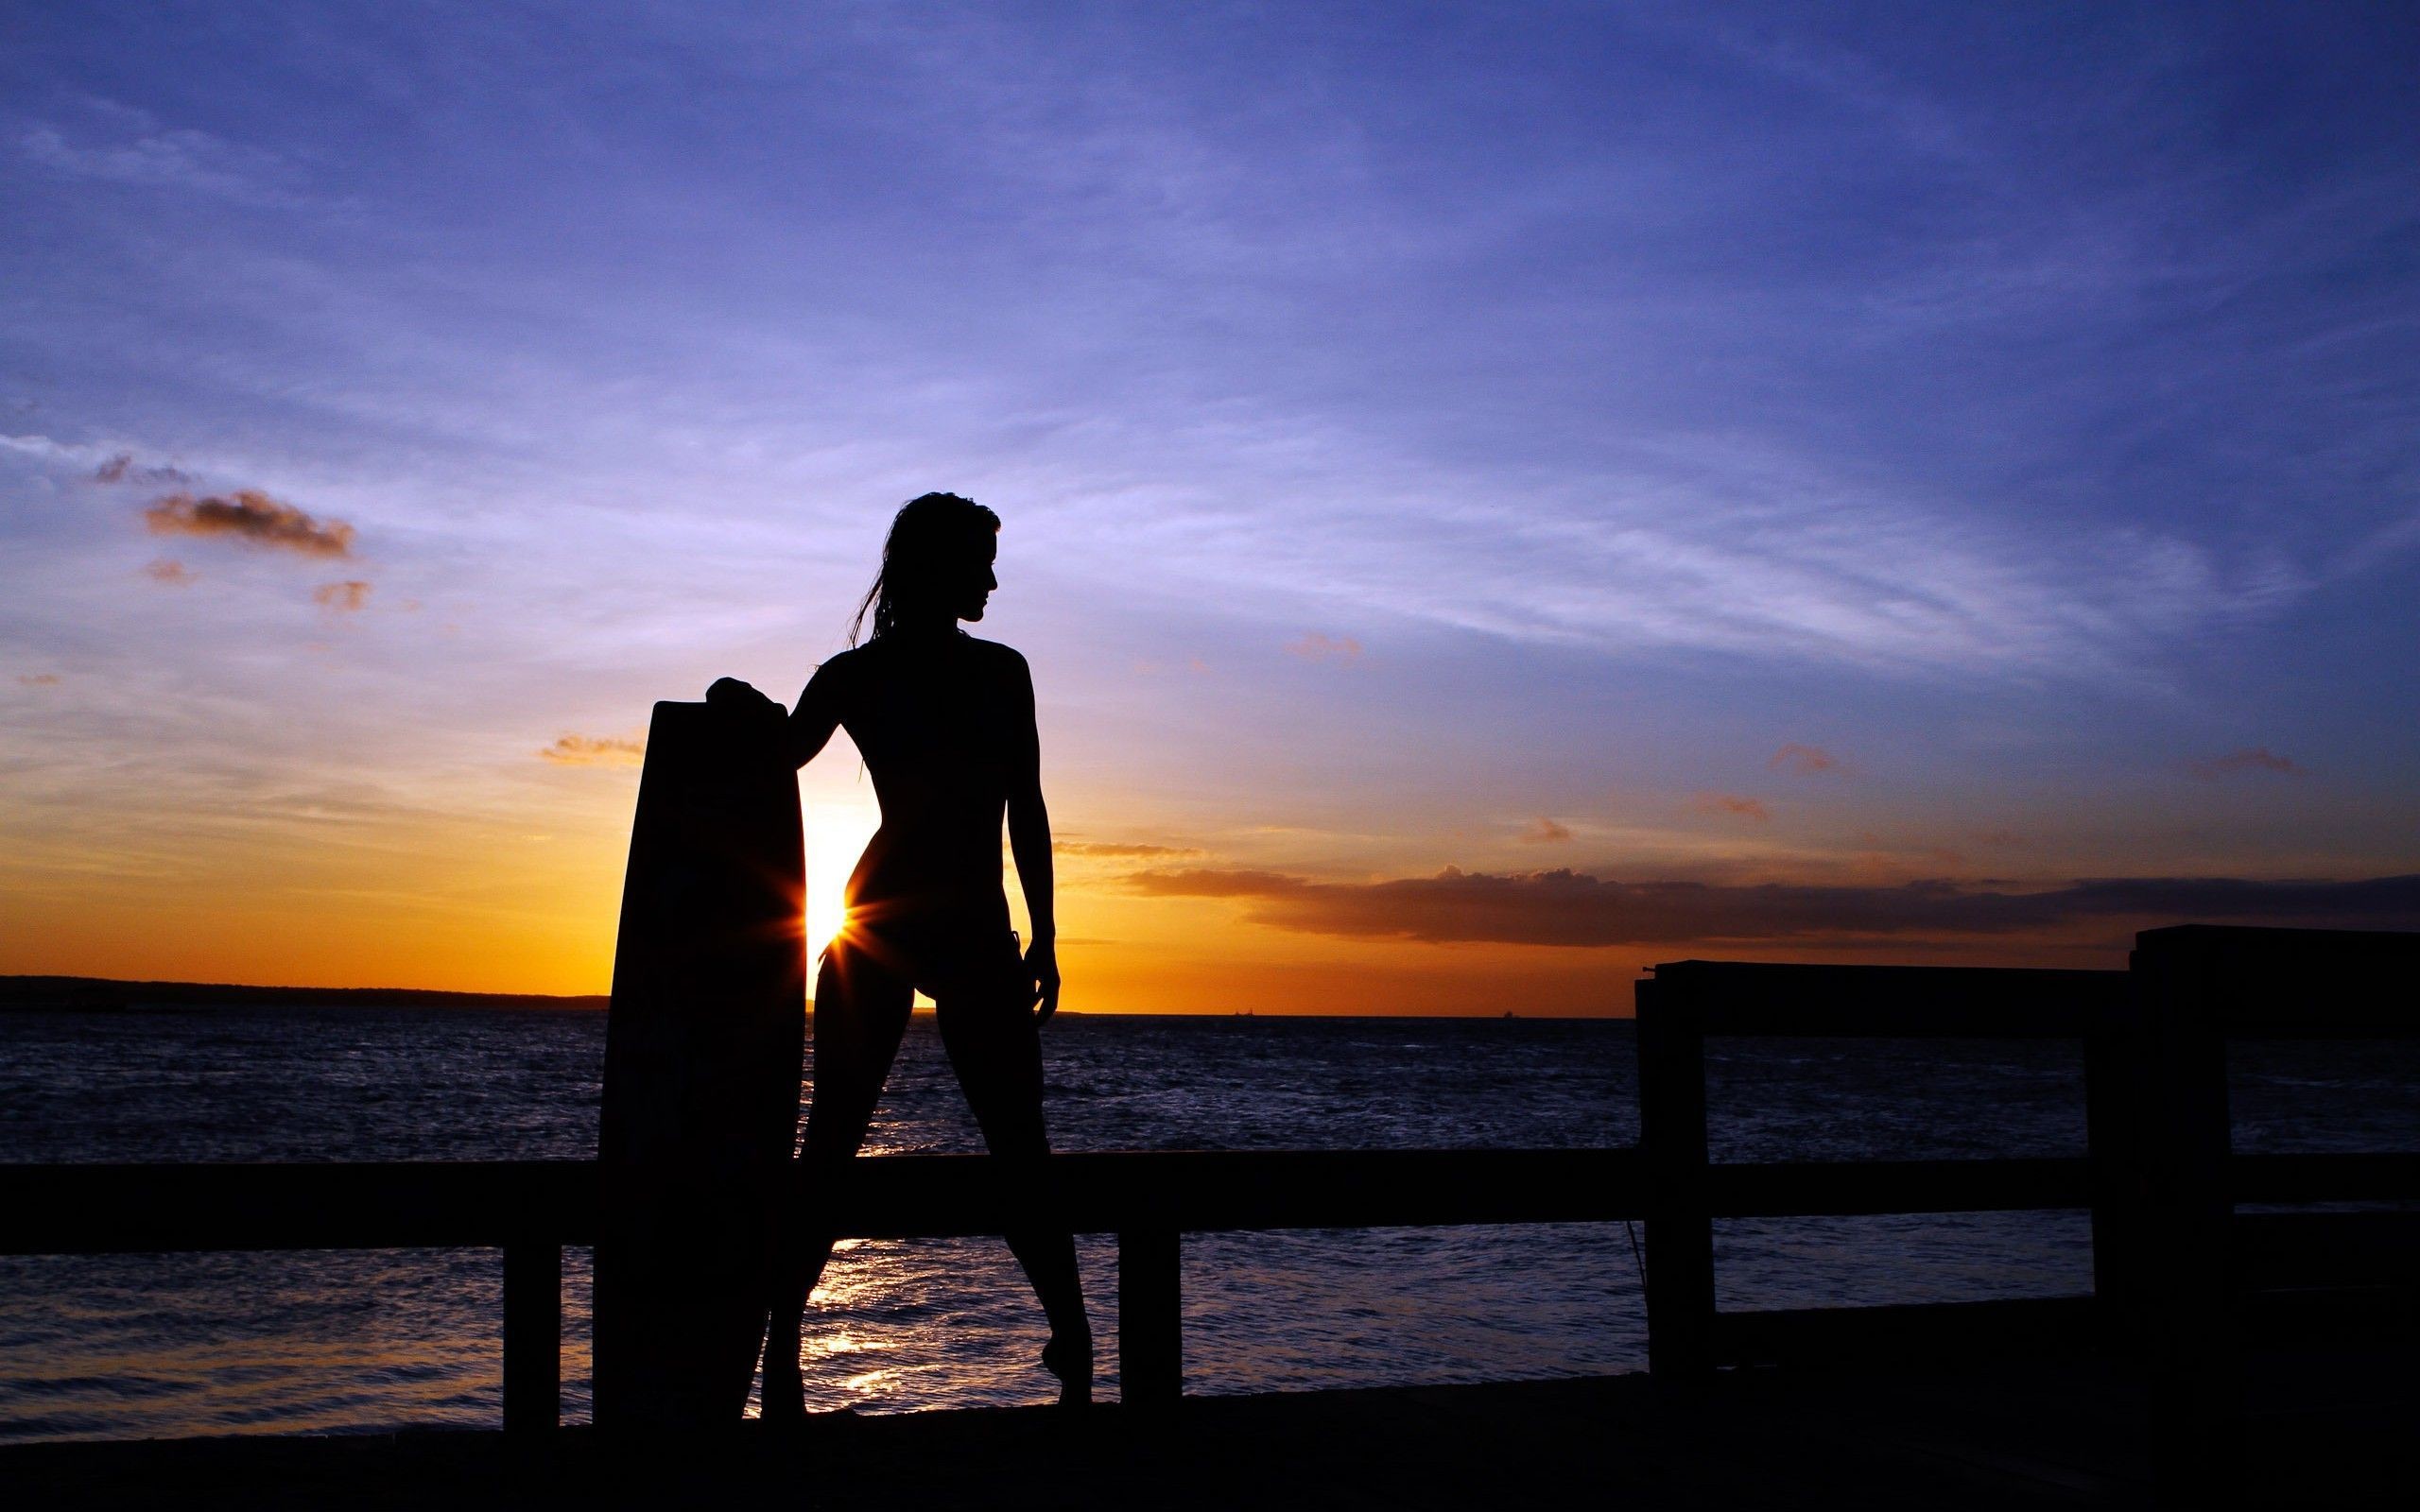 … Woman surfer in the sunset